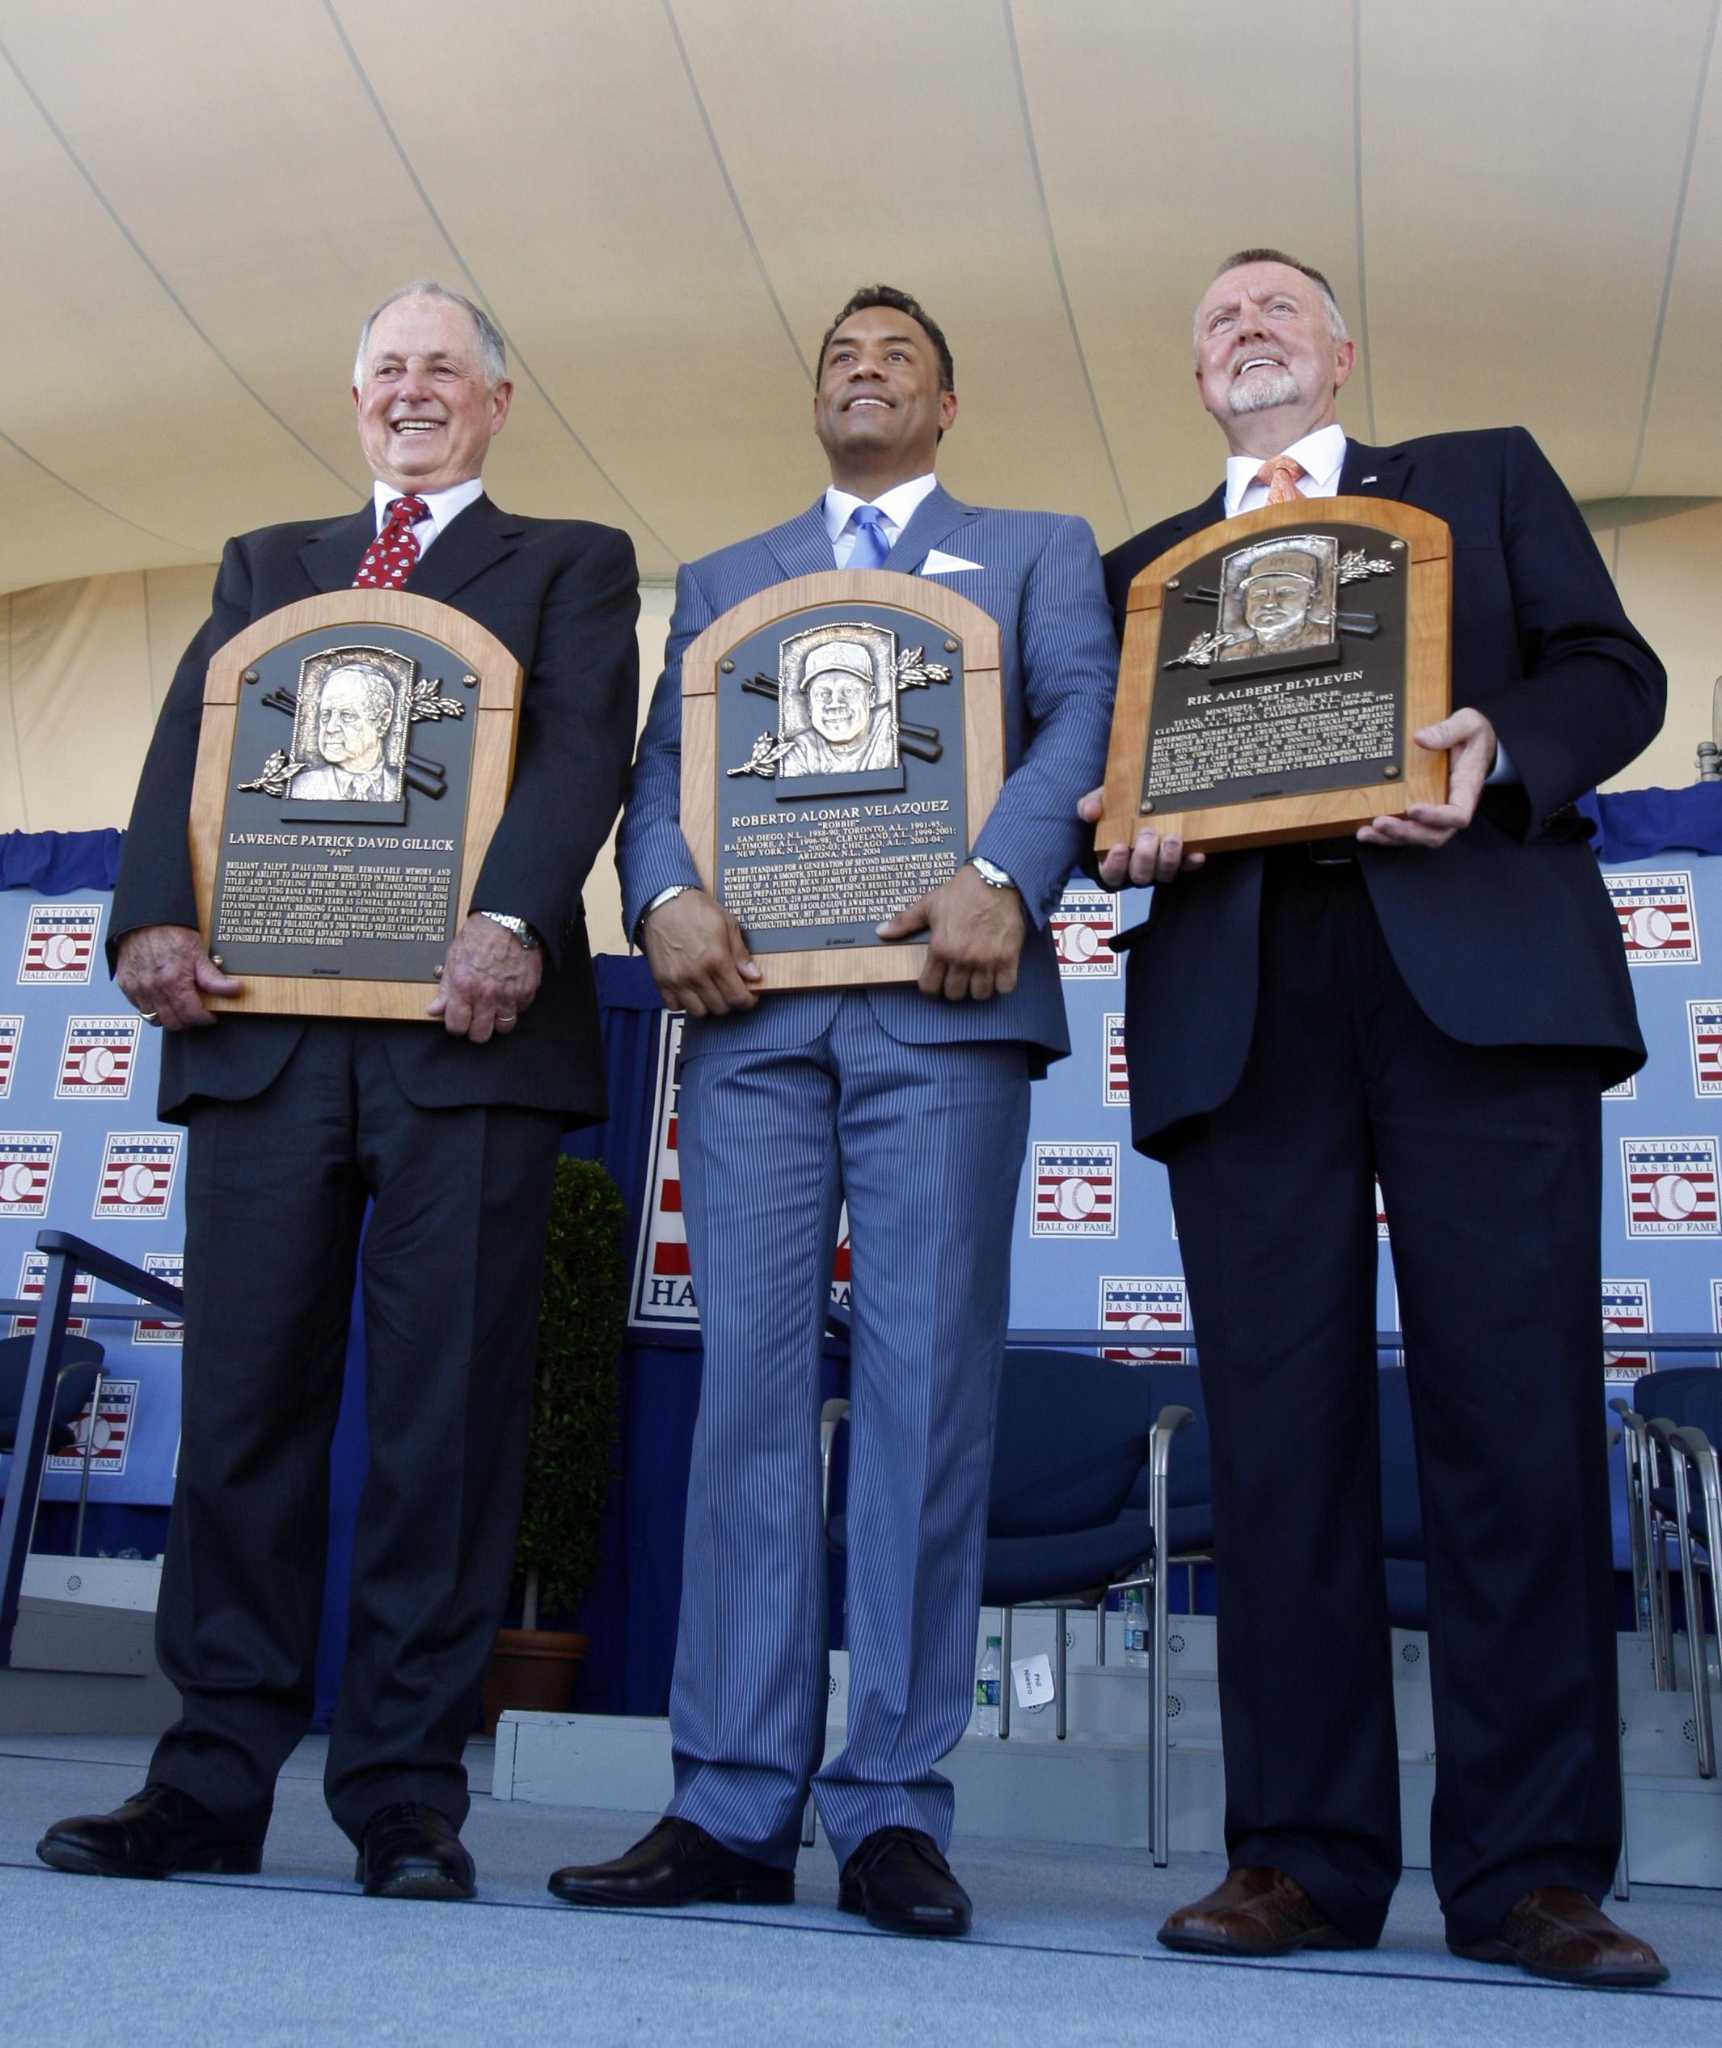 MLB fans travel far to see Alomar, Blyleven at Baseball Hall of Fame